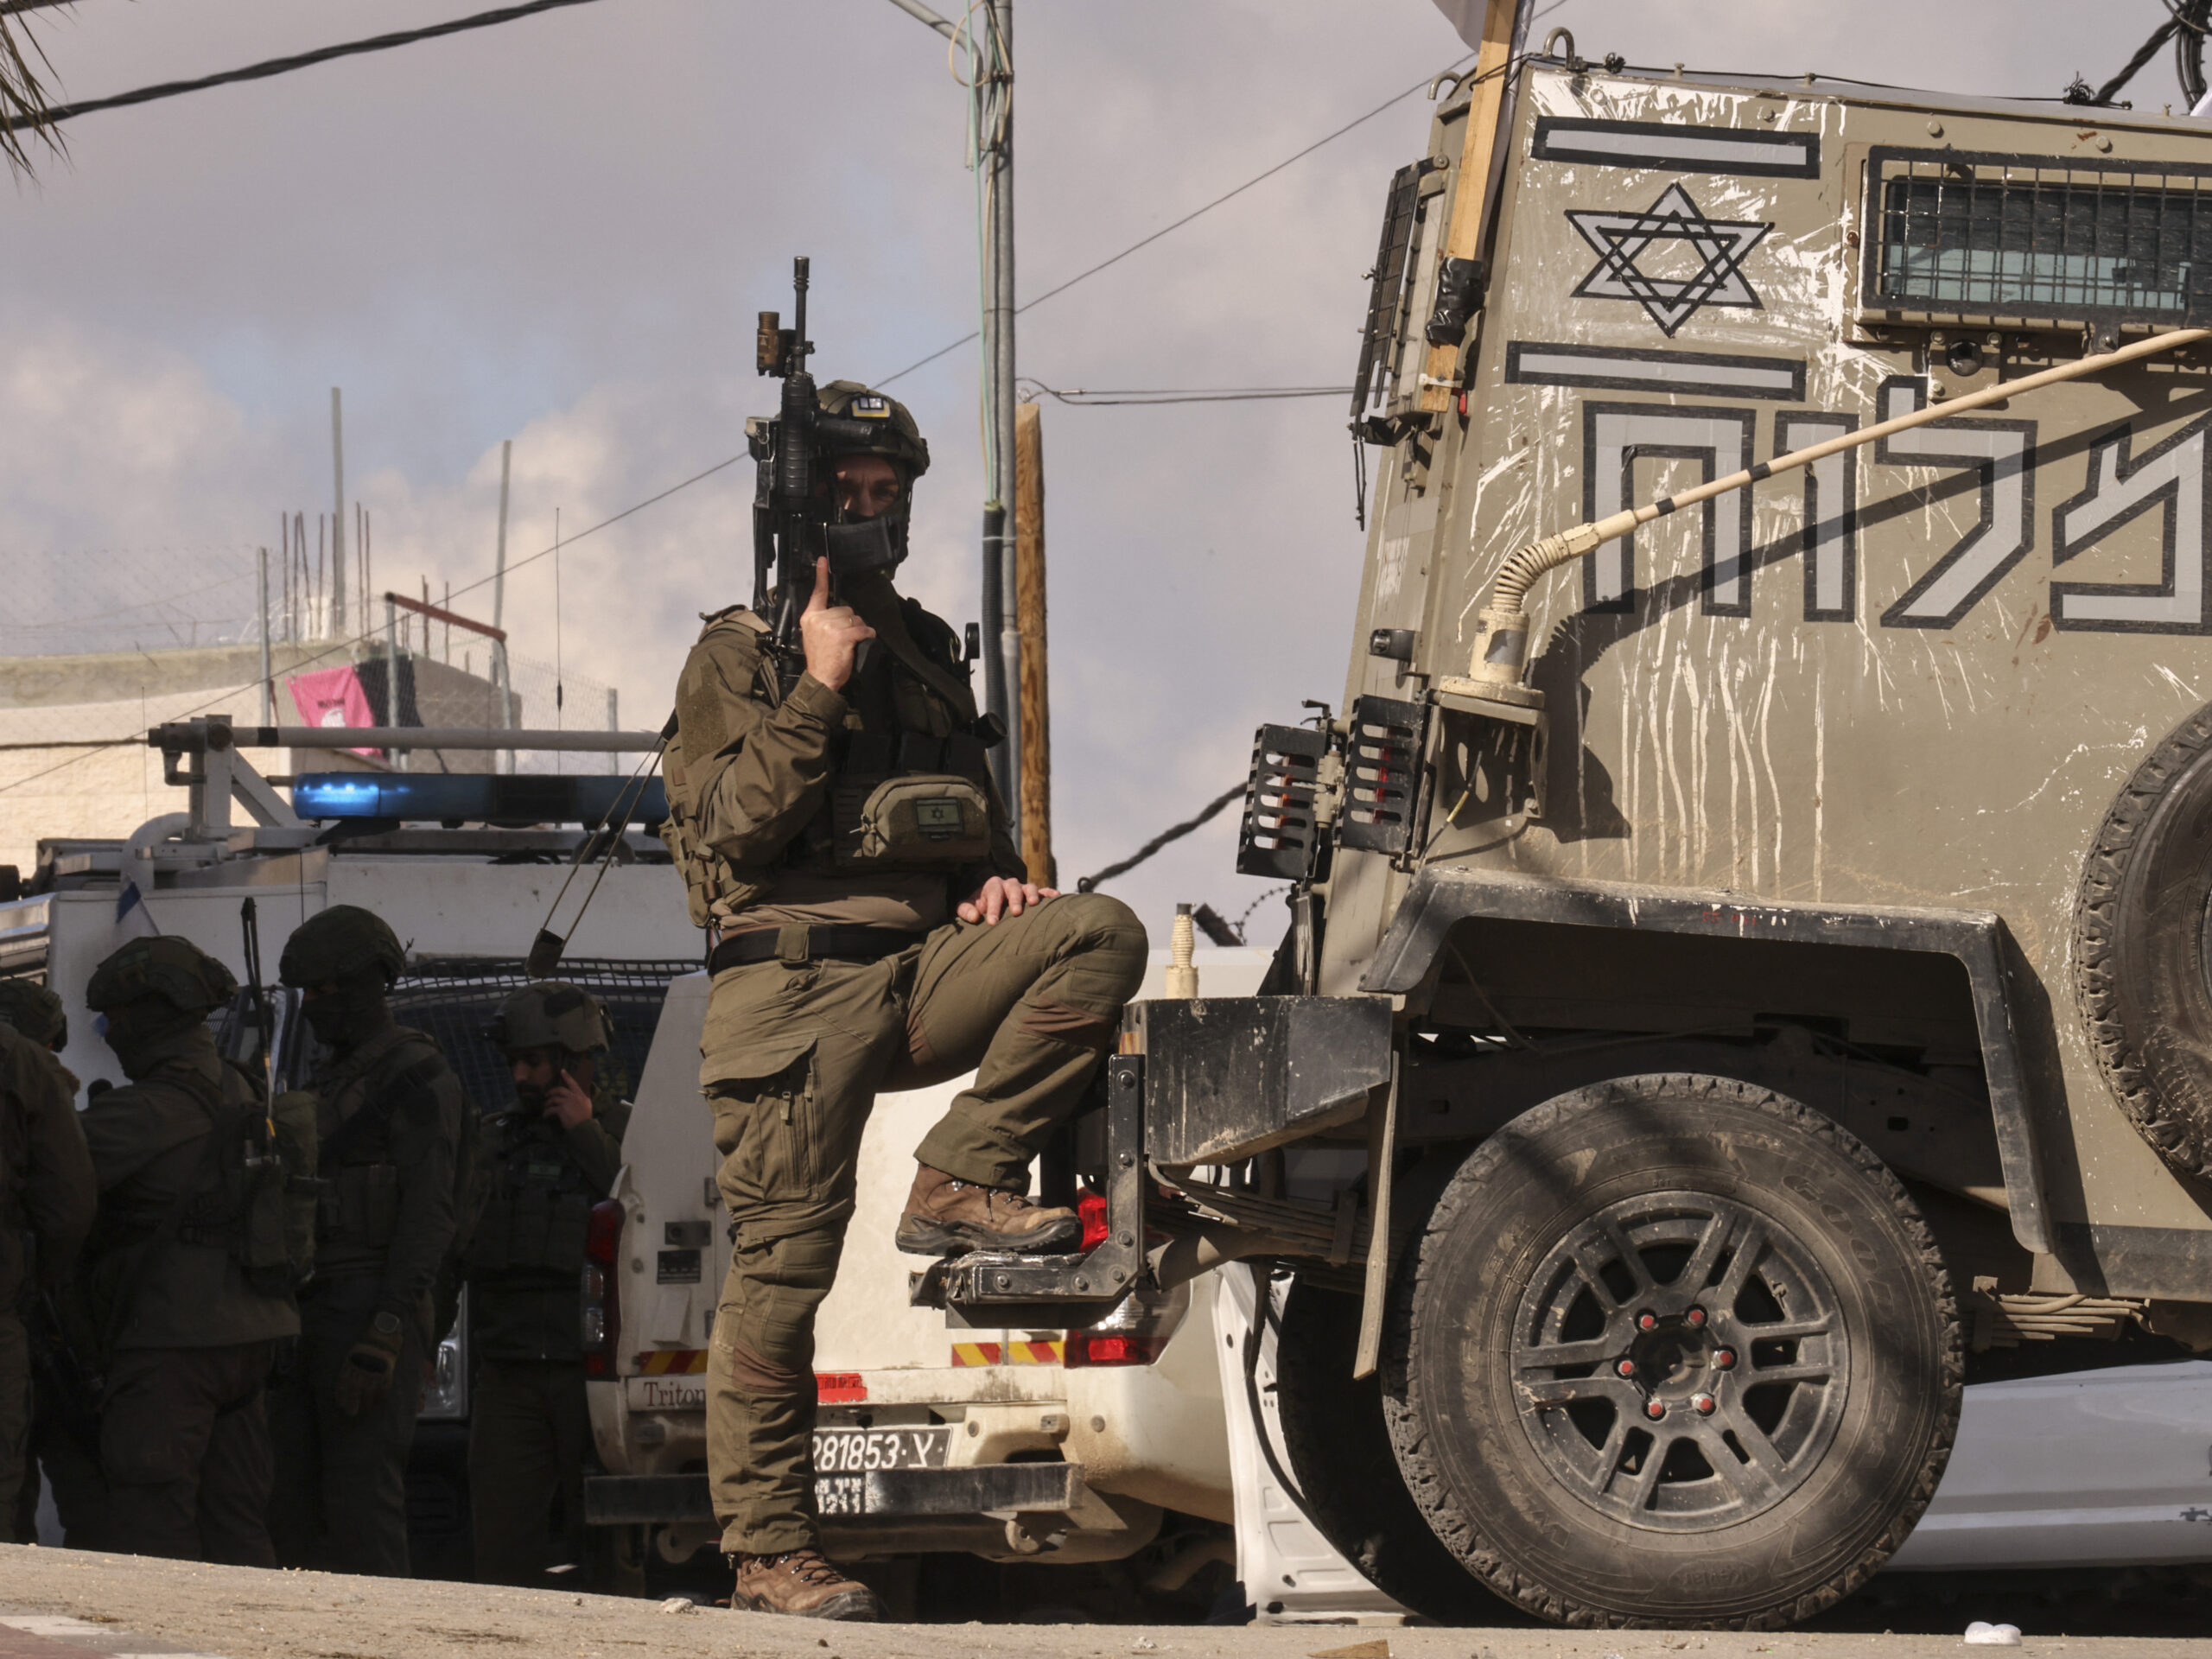 Israeli settlers are guarding the West Bank. Palestinians say it’s worsening violence